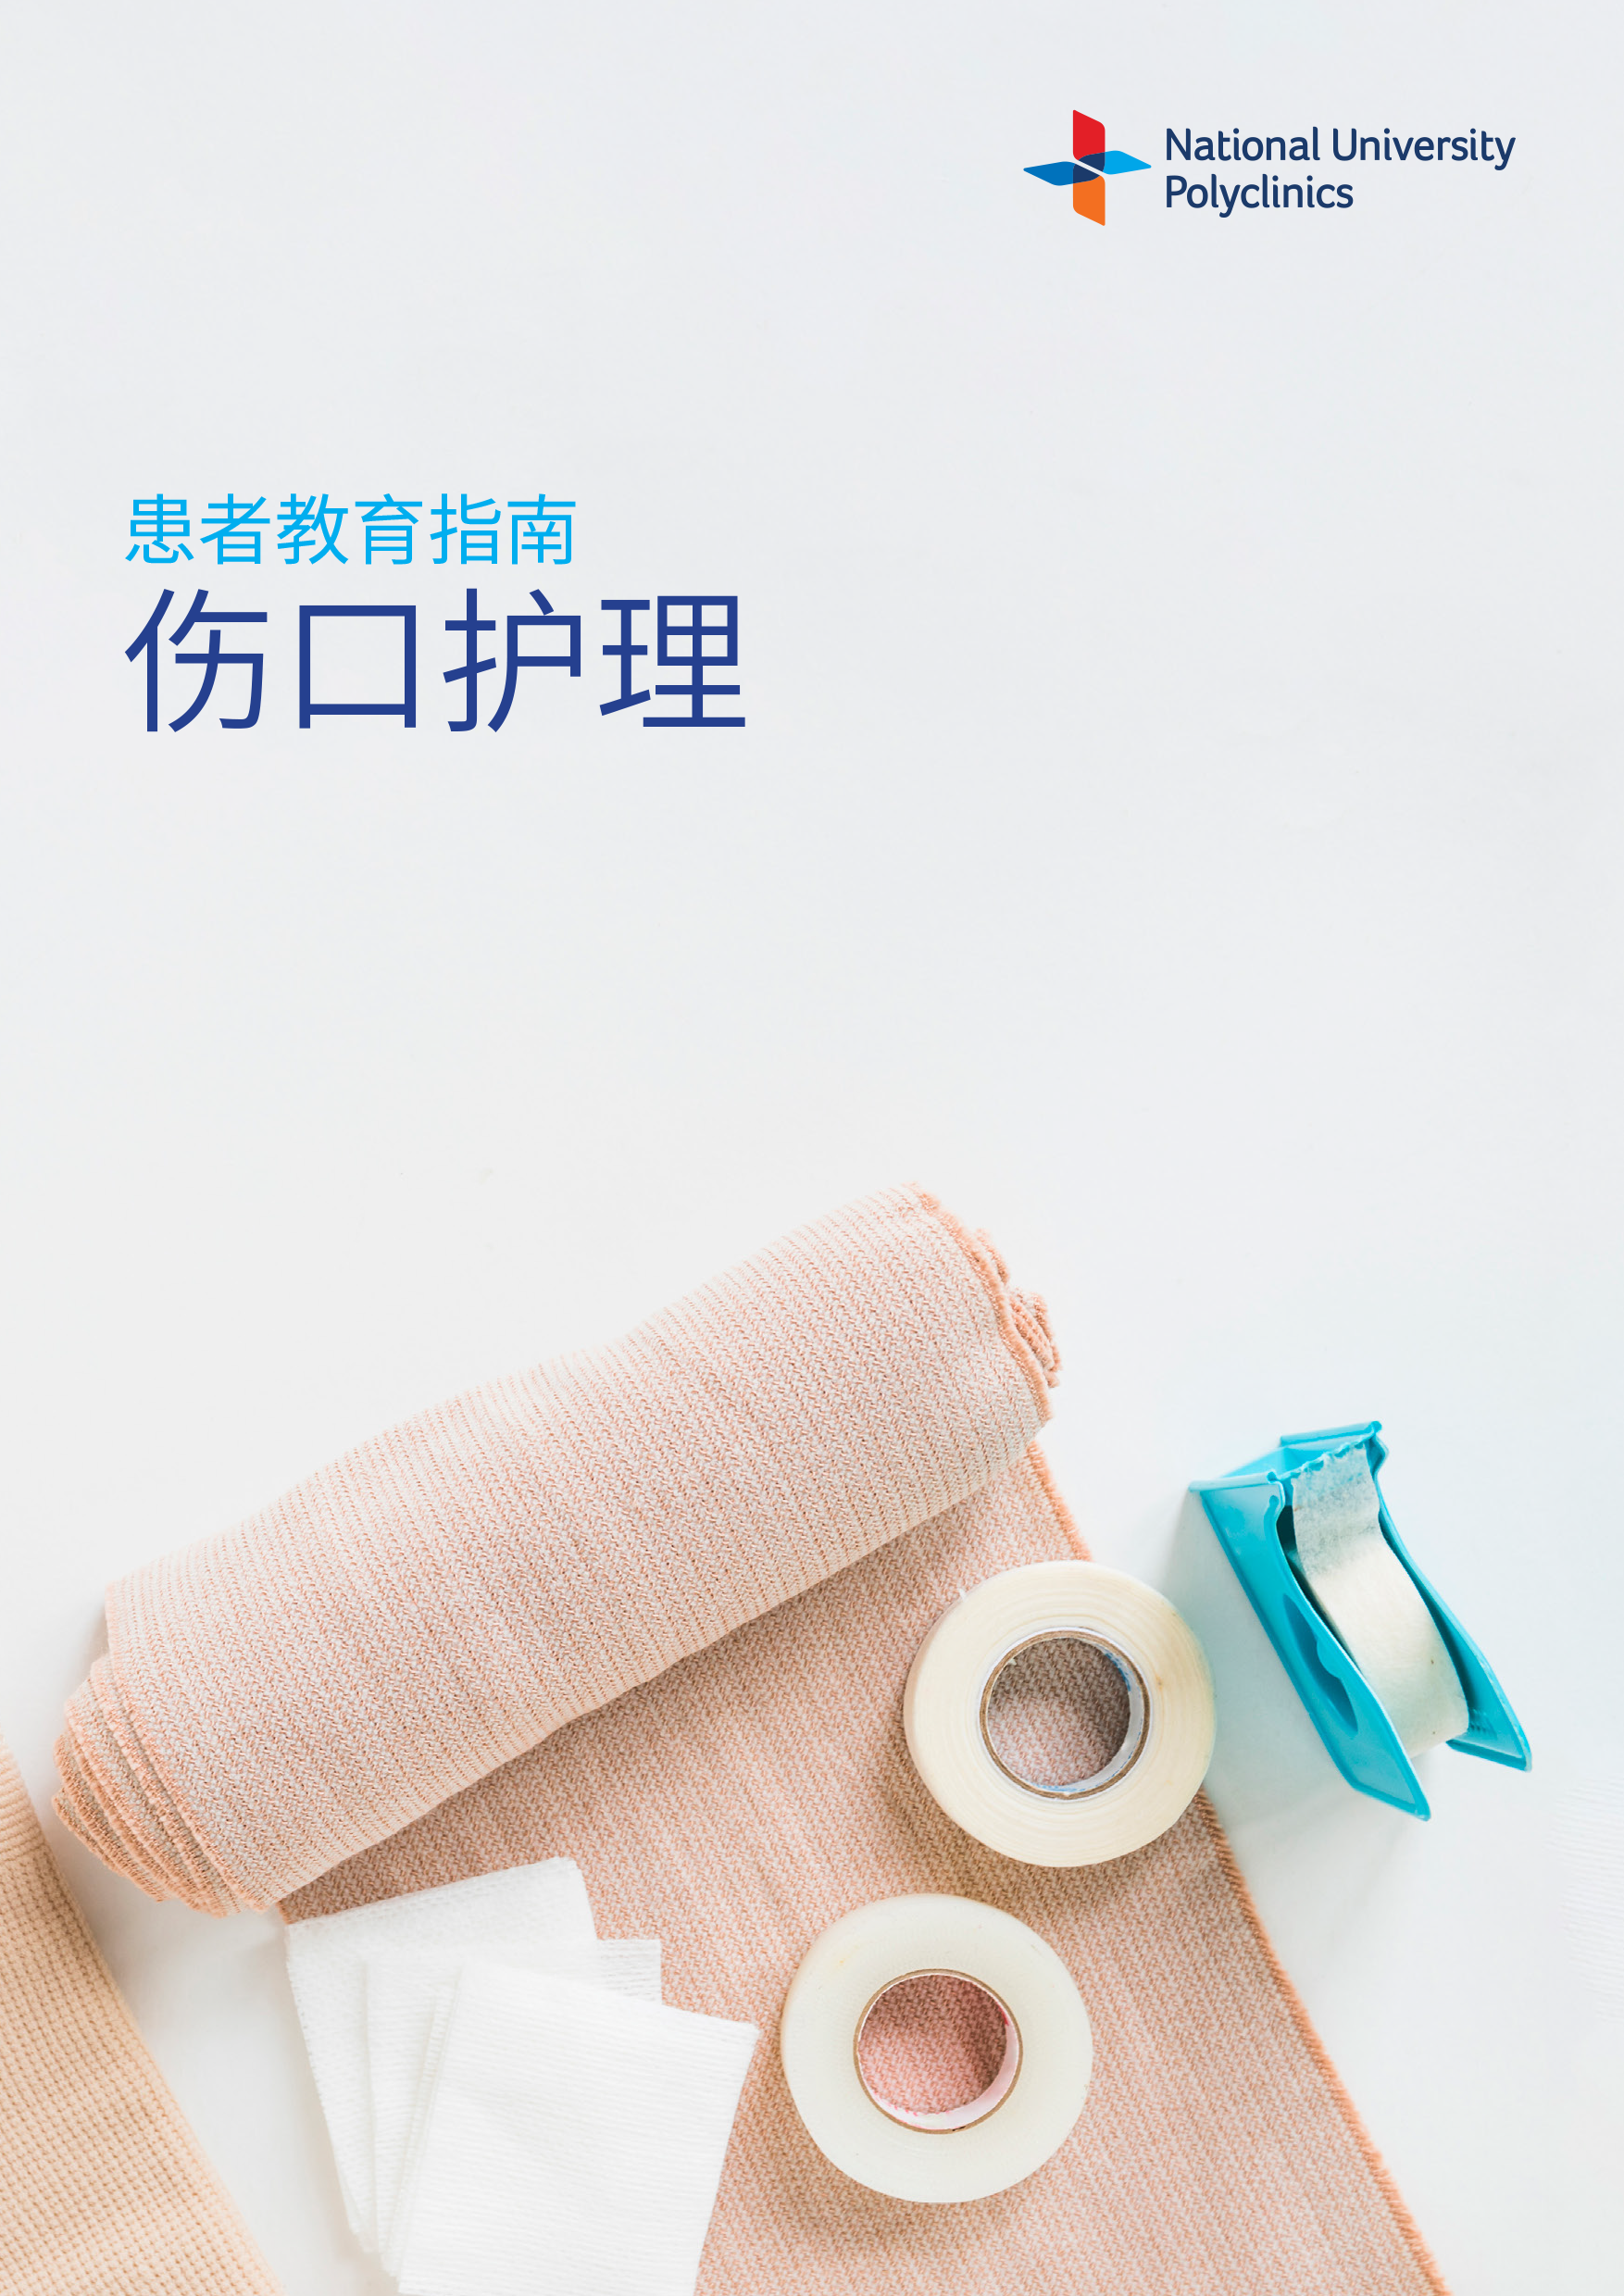 1-Wound Care (Chinese)